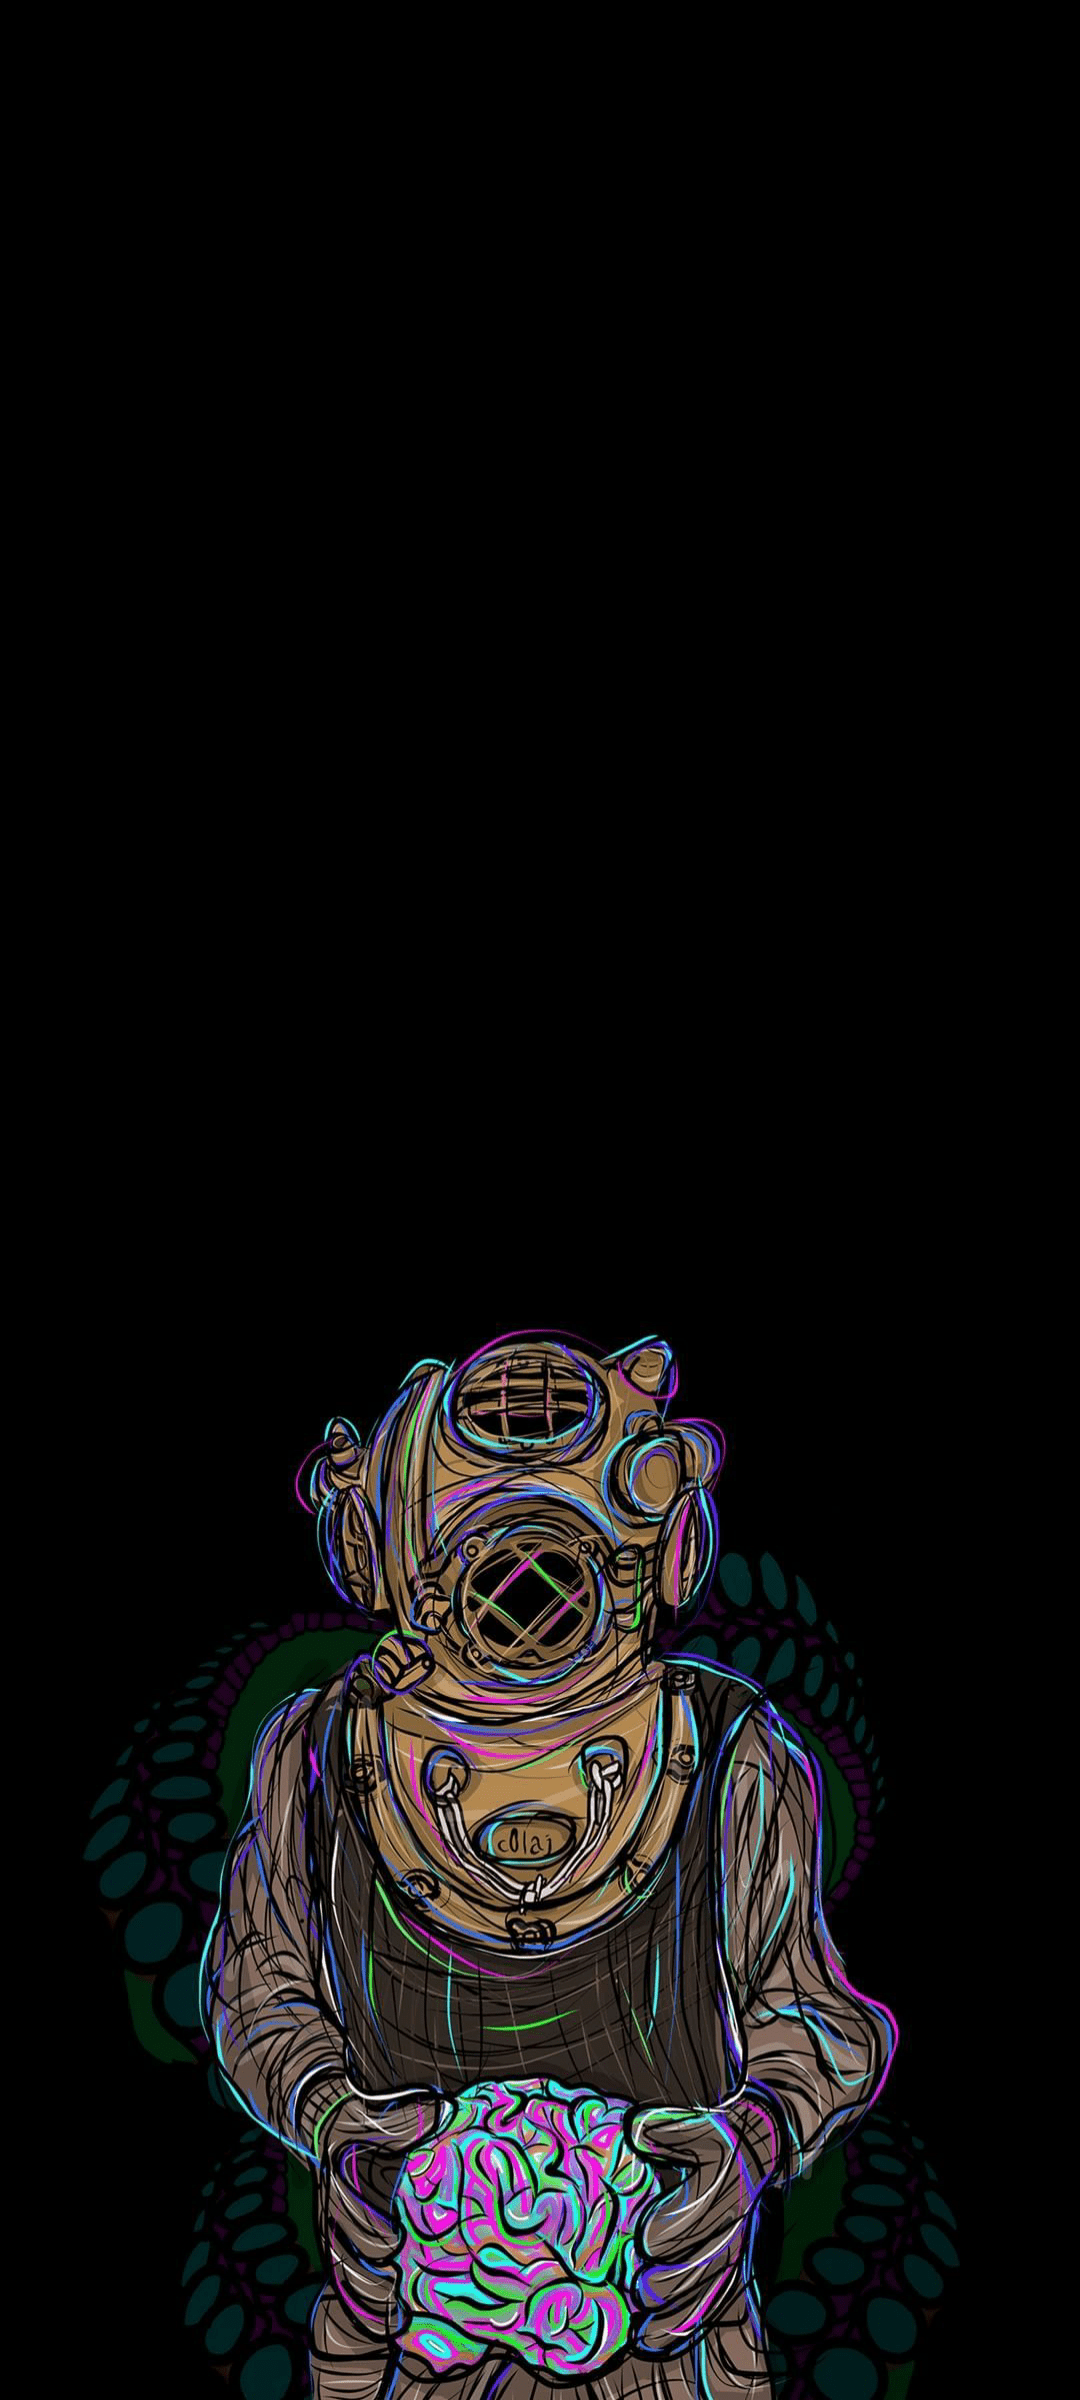 Wallpaper Astronaut, Amoled, Art, Darkness, Space, Background Free Image